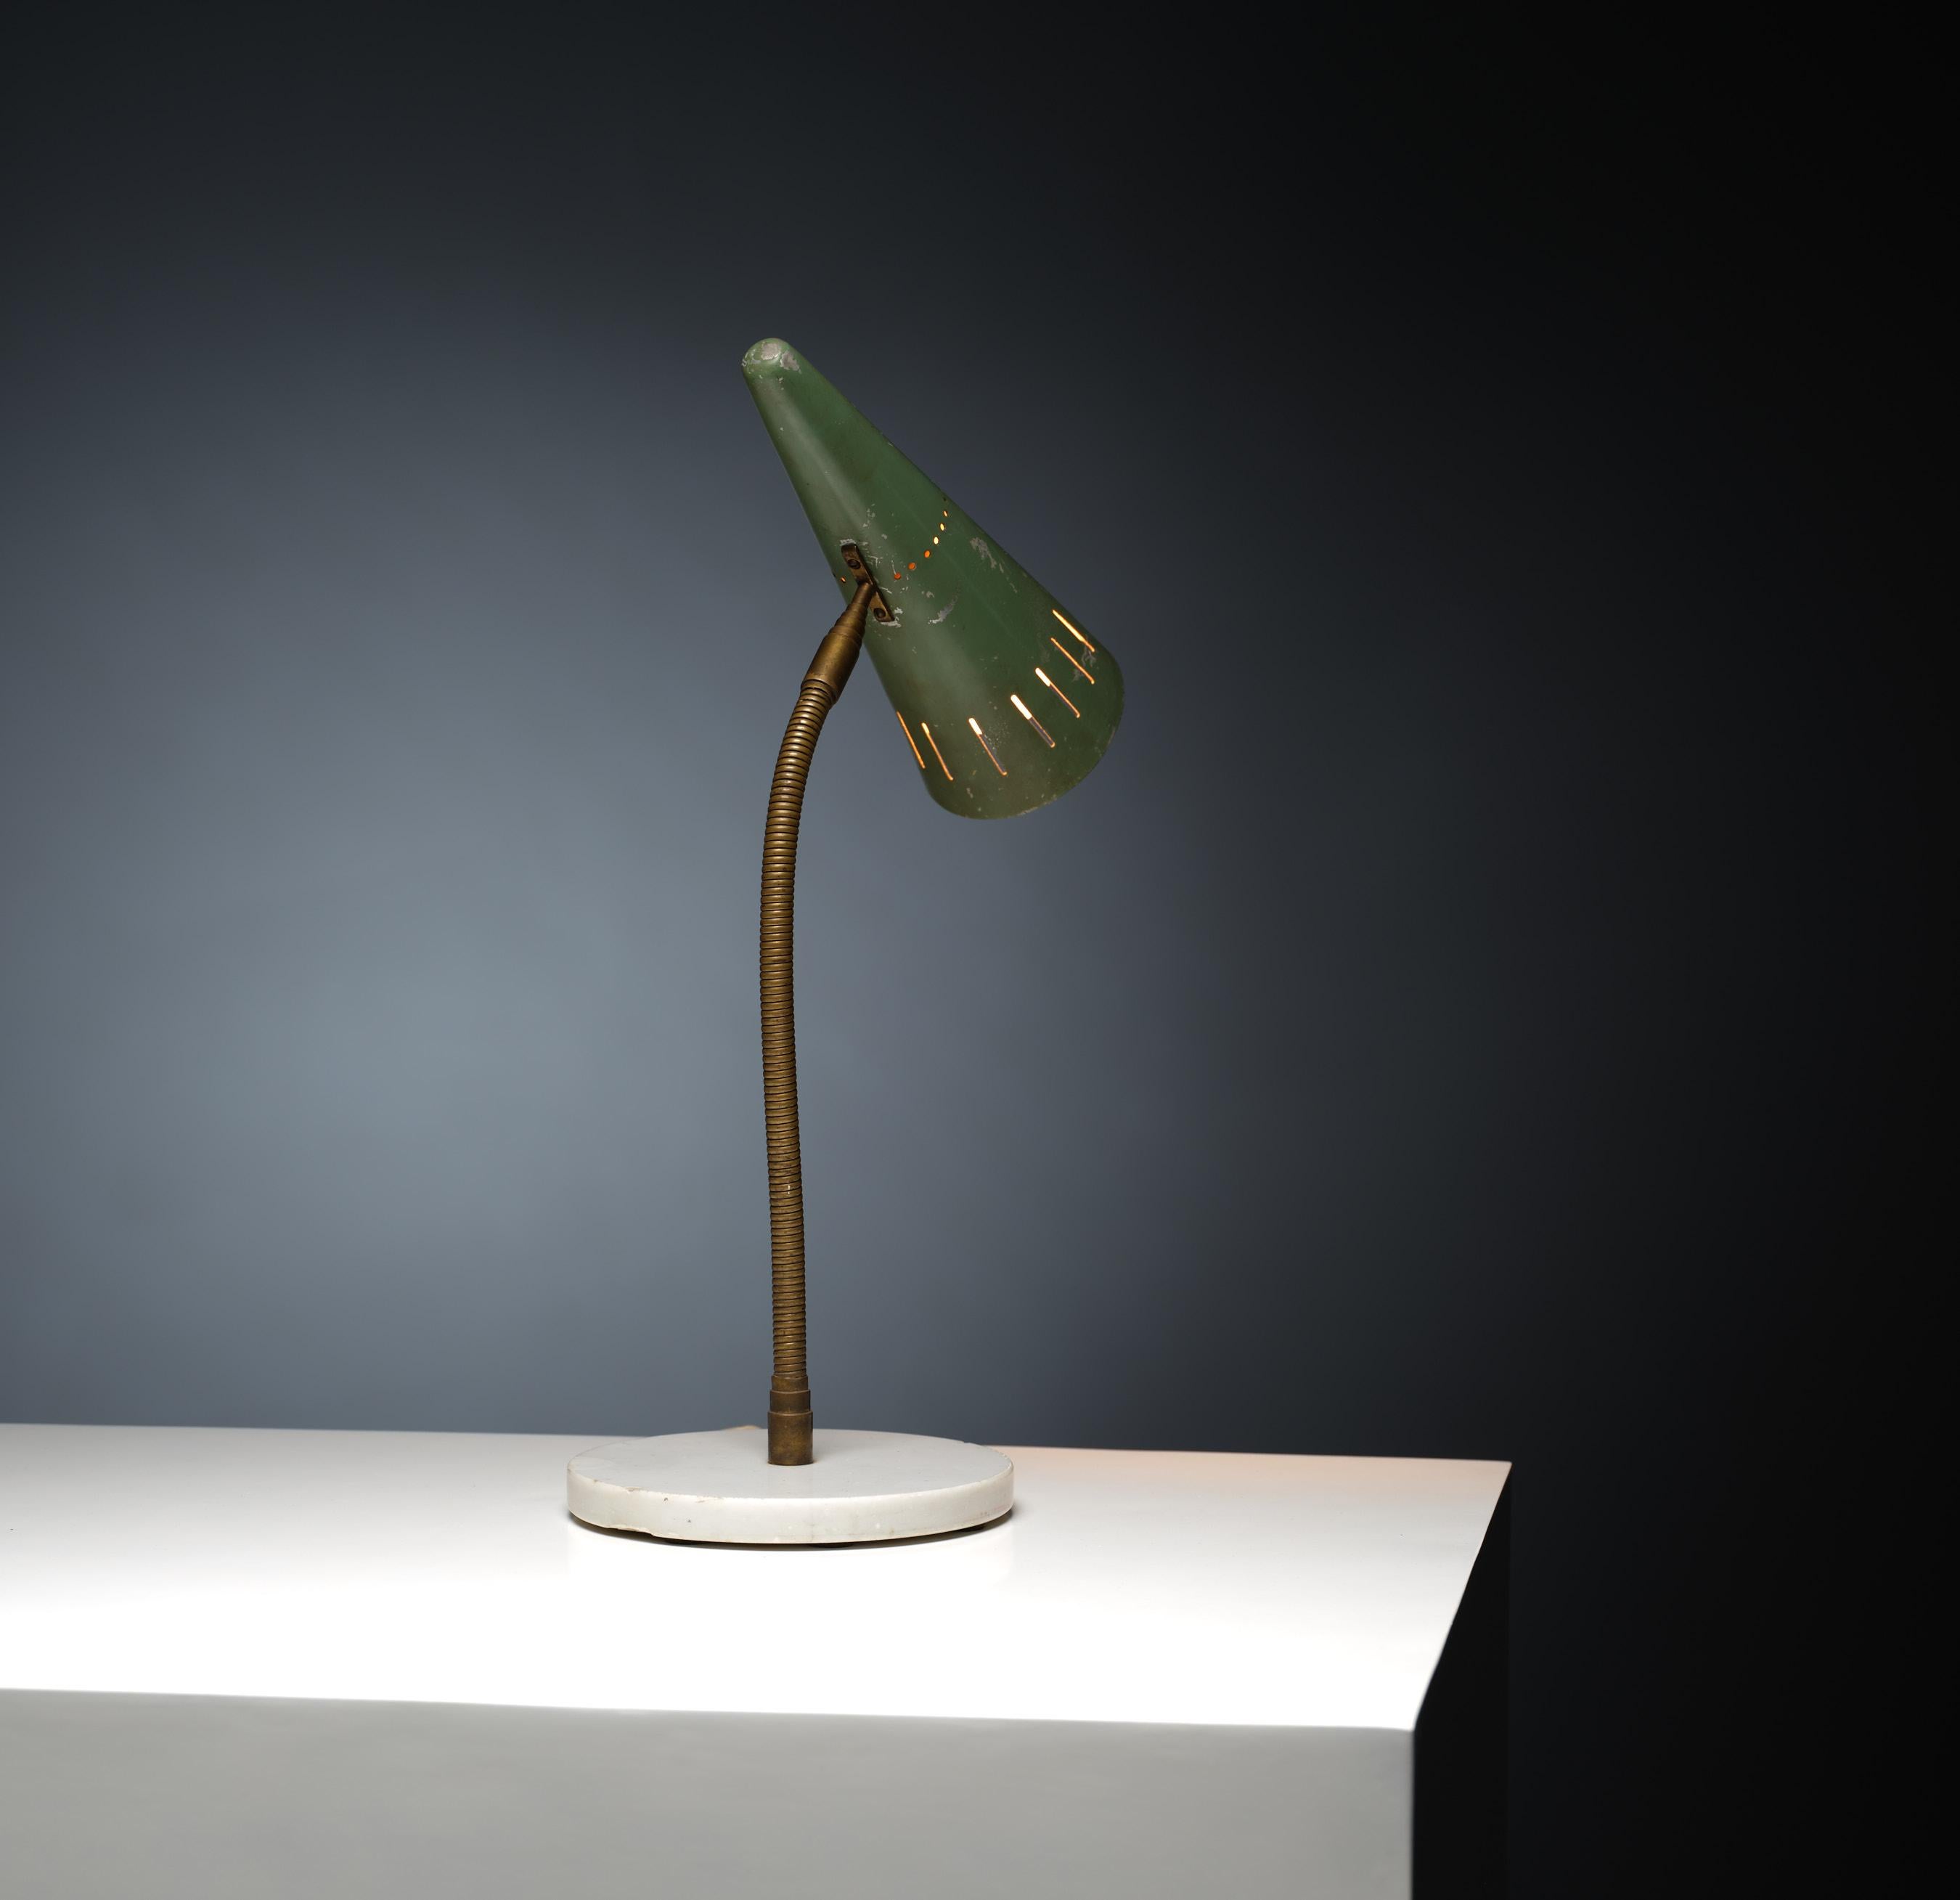 Vintage Italian Table Lamp - 1950s Design with Green Lacquered Metal Shade 4